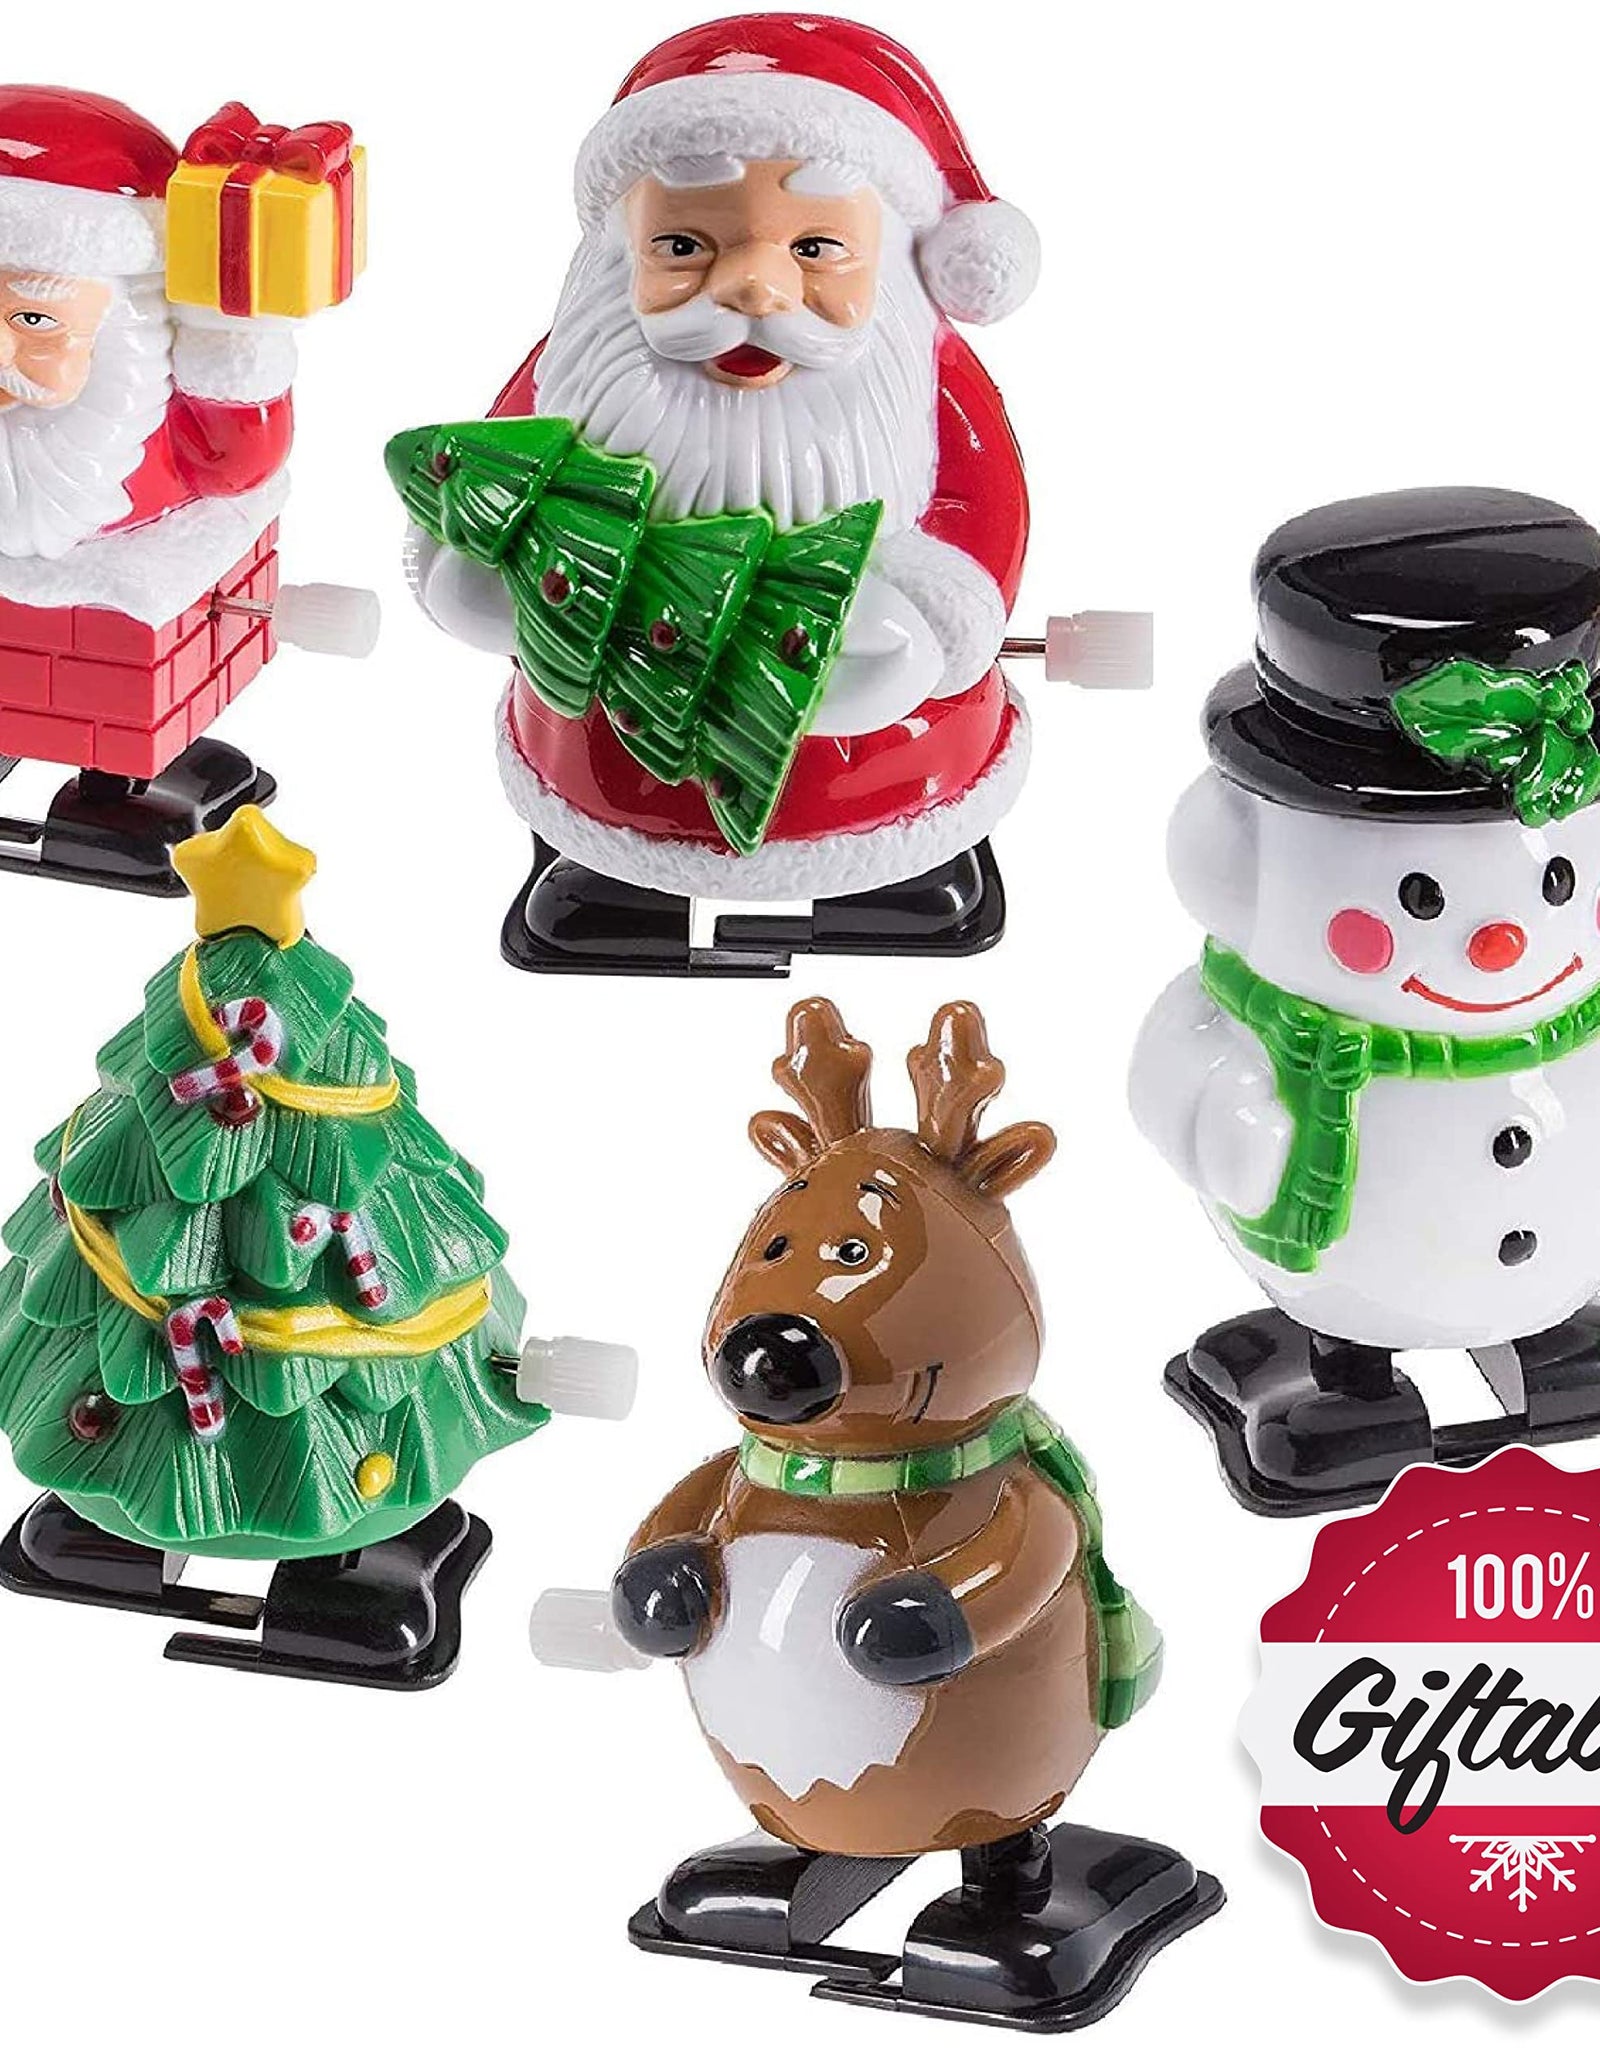 Prextex Christmas Wind Up Toys for Kids & Adult - Santas Christmas Tree Deer and Snowmen Wind up Stocking Stuffers